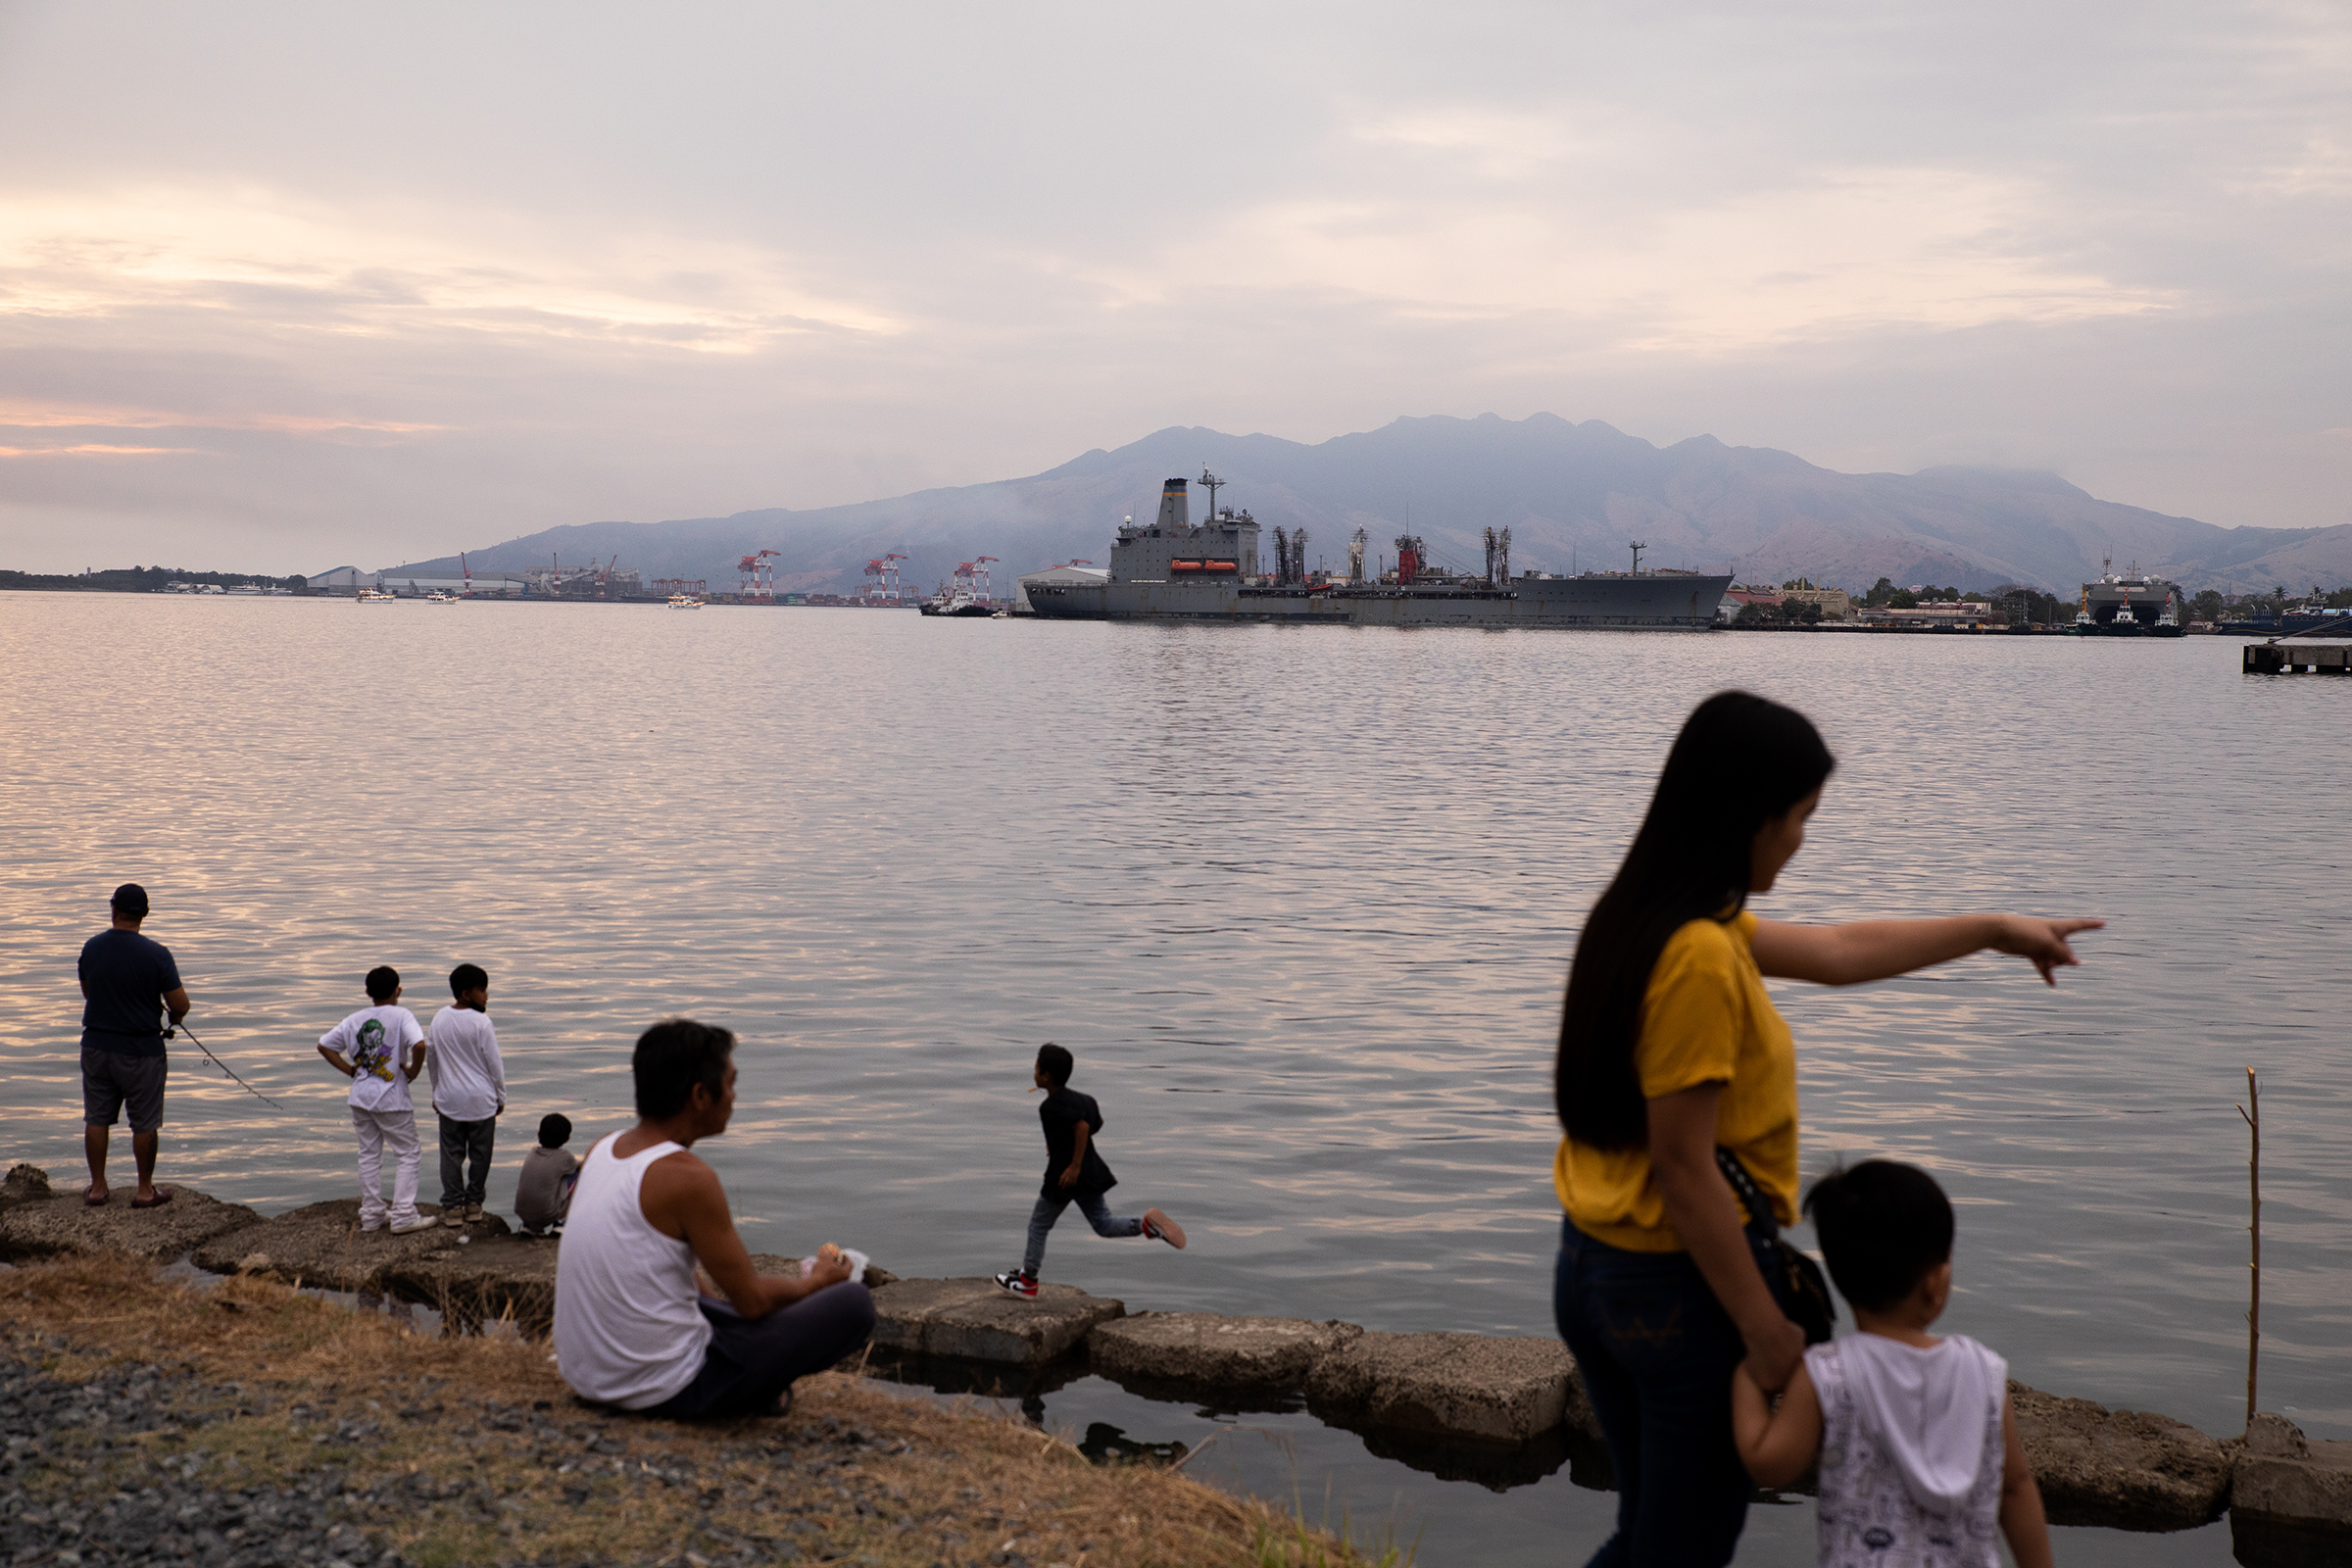 People enjoy the sunset by Malawaan Picnic Park at the Subic Bay Freeport Zone in the province of Zambales, Philippines, on Feb. 20, 2023. (Geric Cruz for TIME)